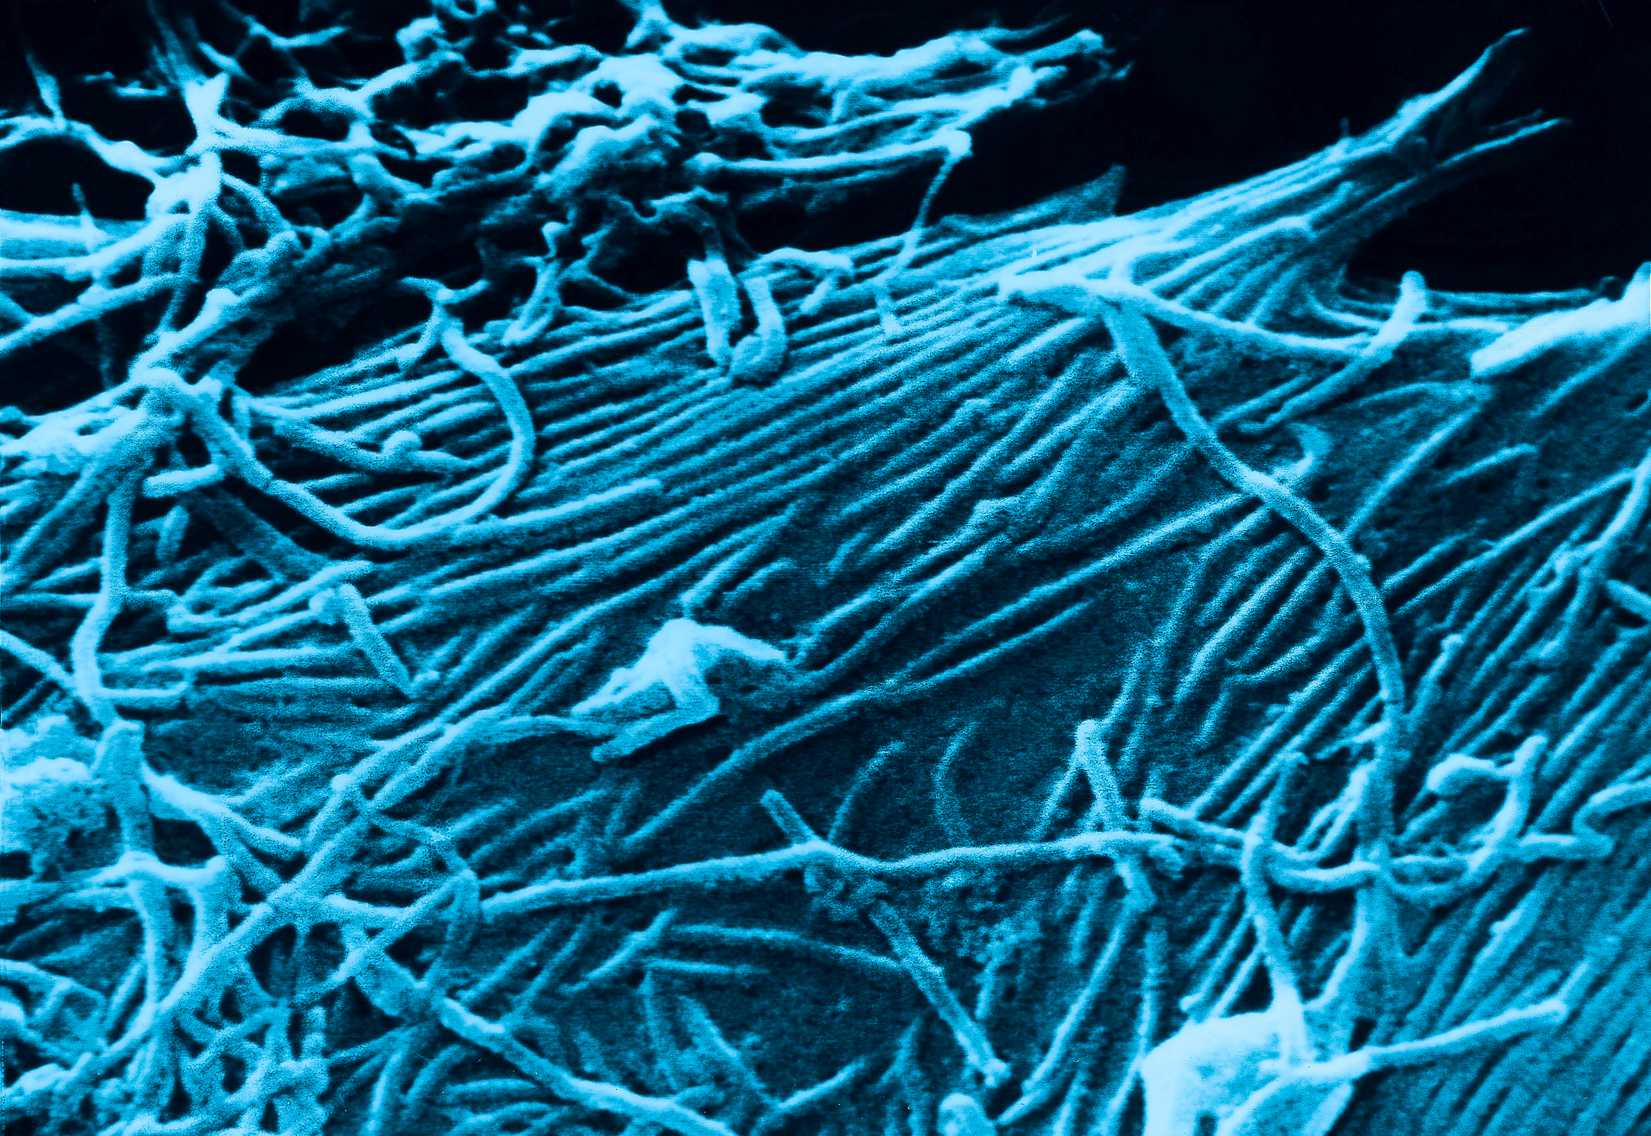 This scanning electron micrograph, SEM, depicts a number of Ebola virions. (UIG/Getty Images)